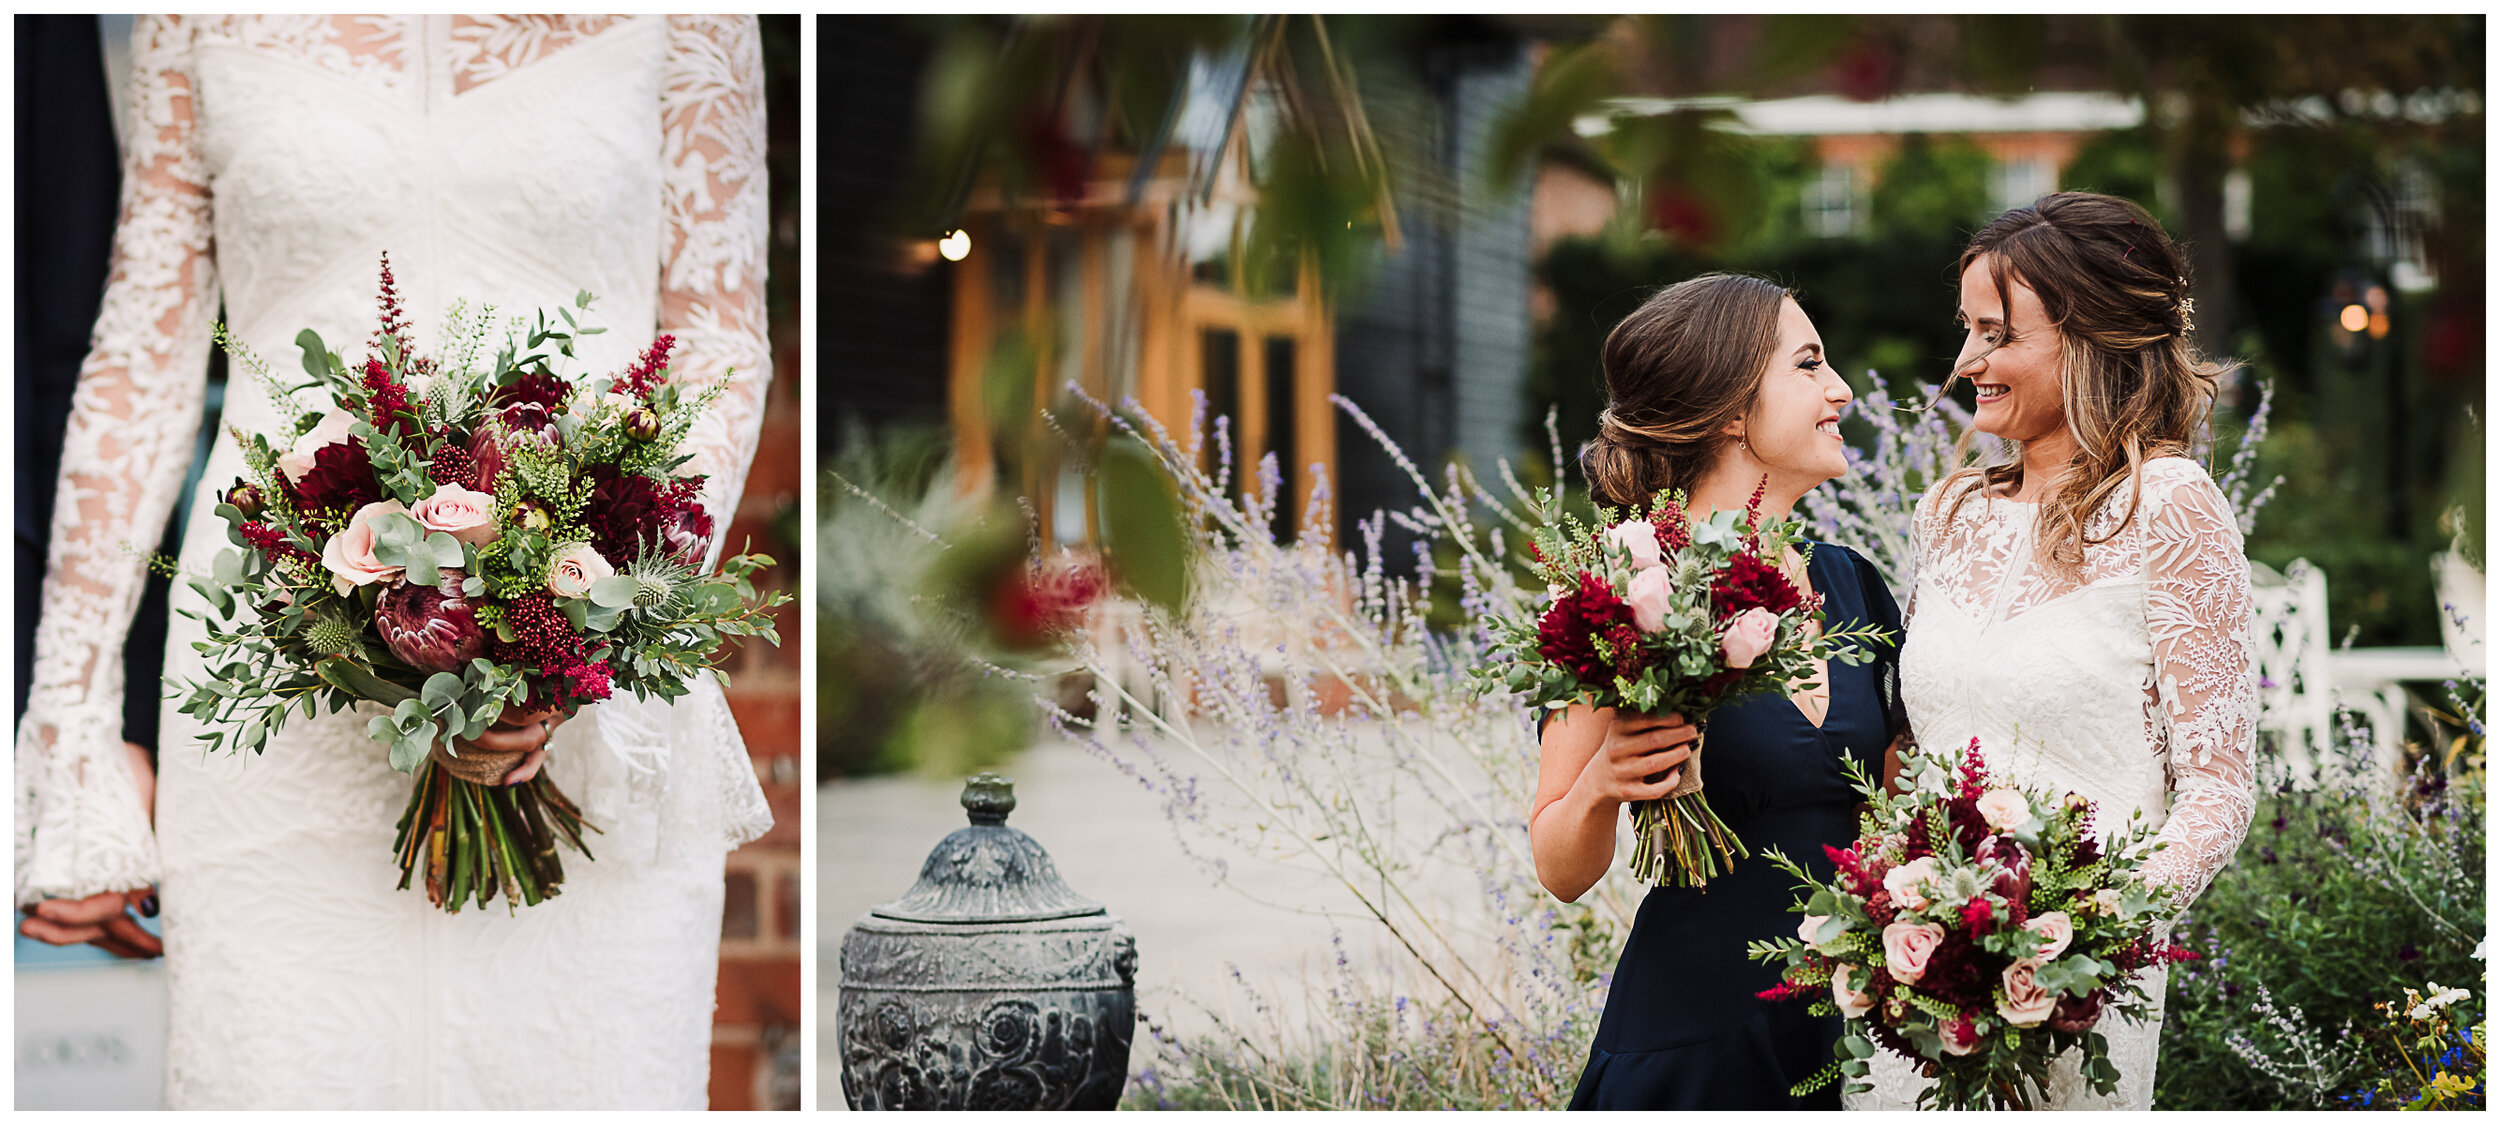 Bridal bouquet and bridesmaid bouquet:  Andrew Flemming